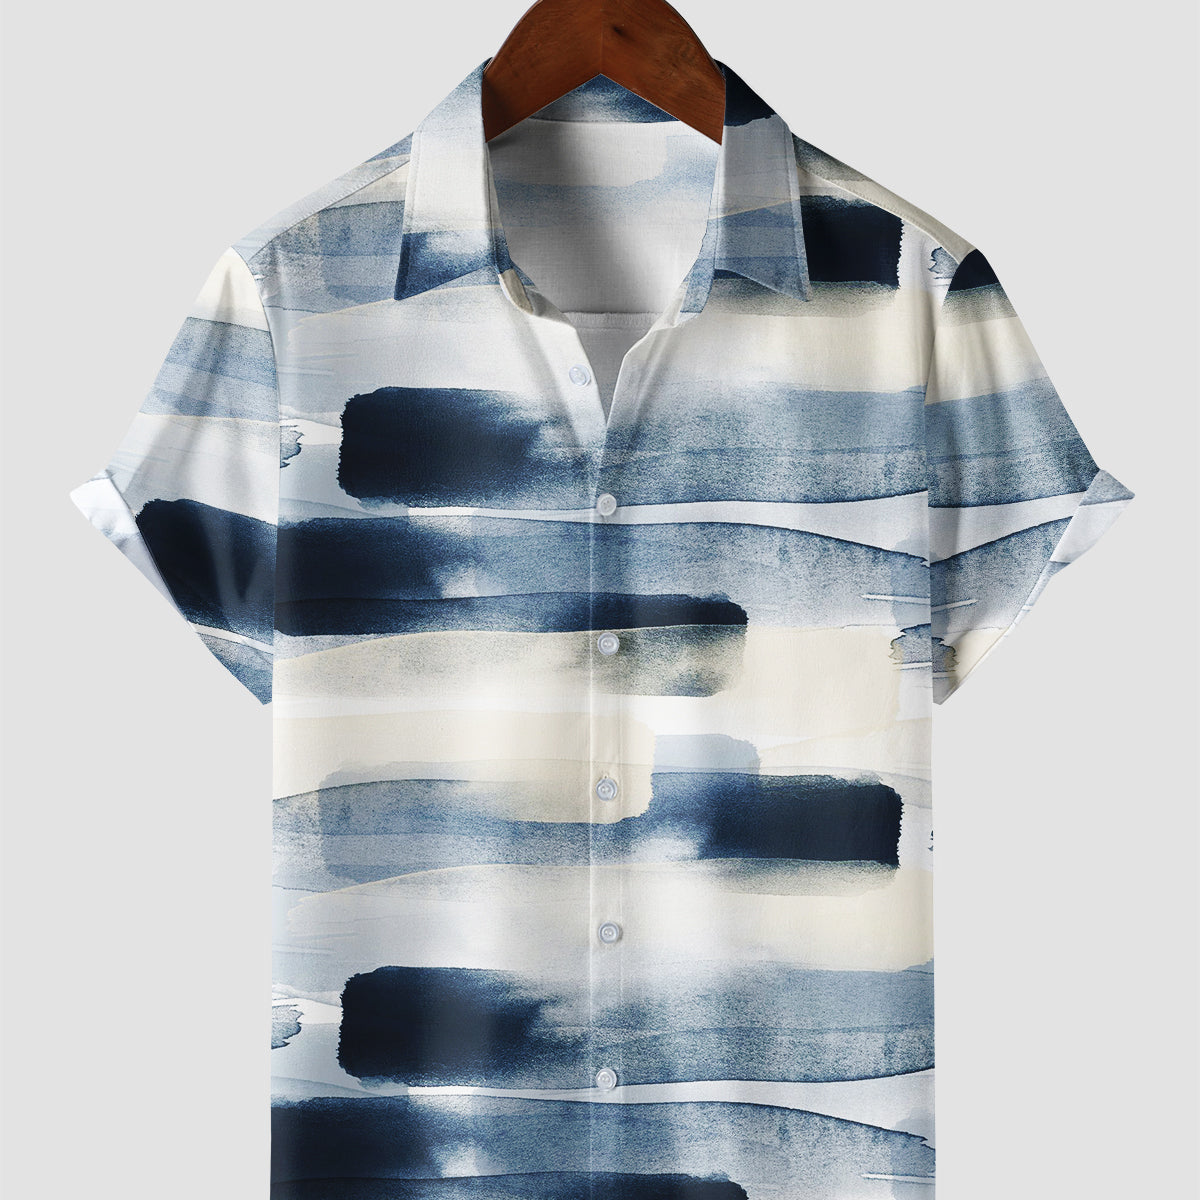 Men's Retro Abstract Watercolor Striped Gradient Short Sleeve Button Up Beach Vintage Shirt